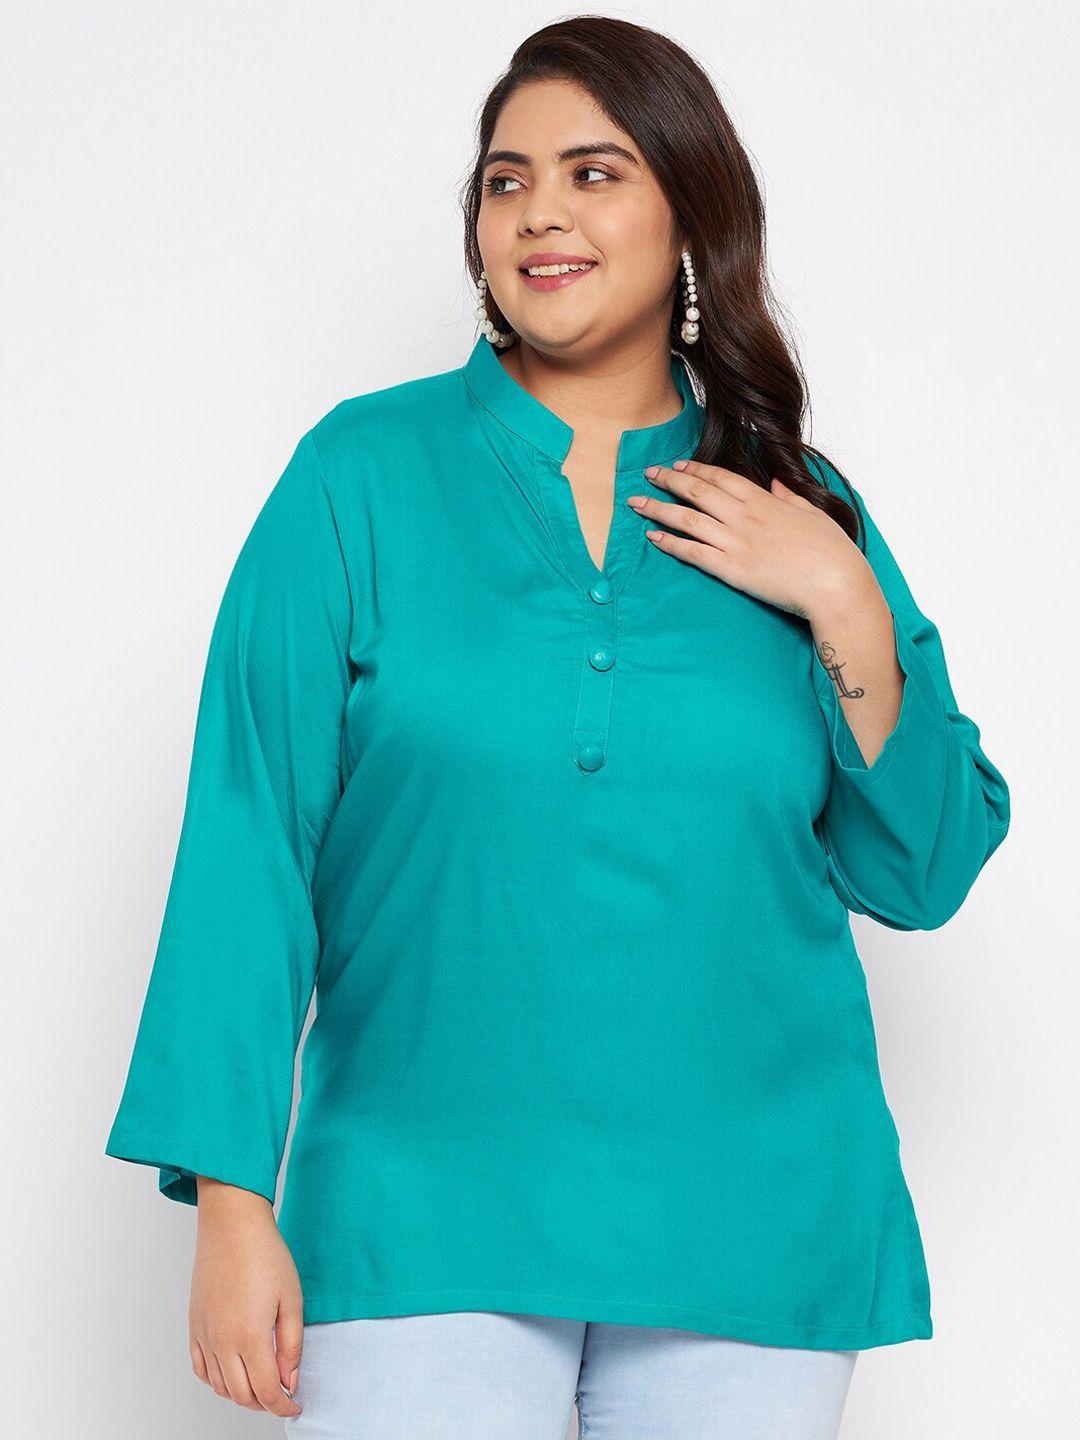 vinaan plus size band collar puff sleeves shirt style top